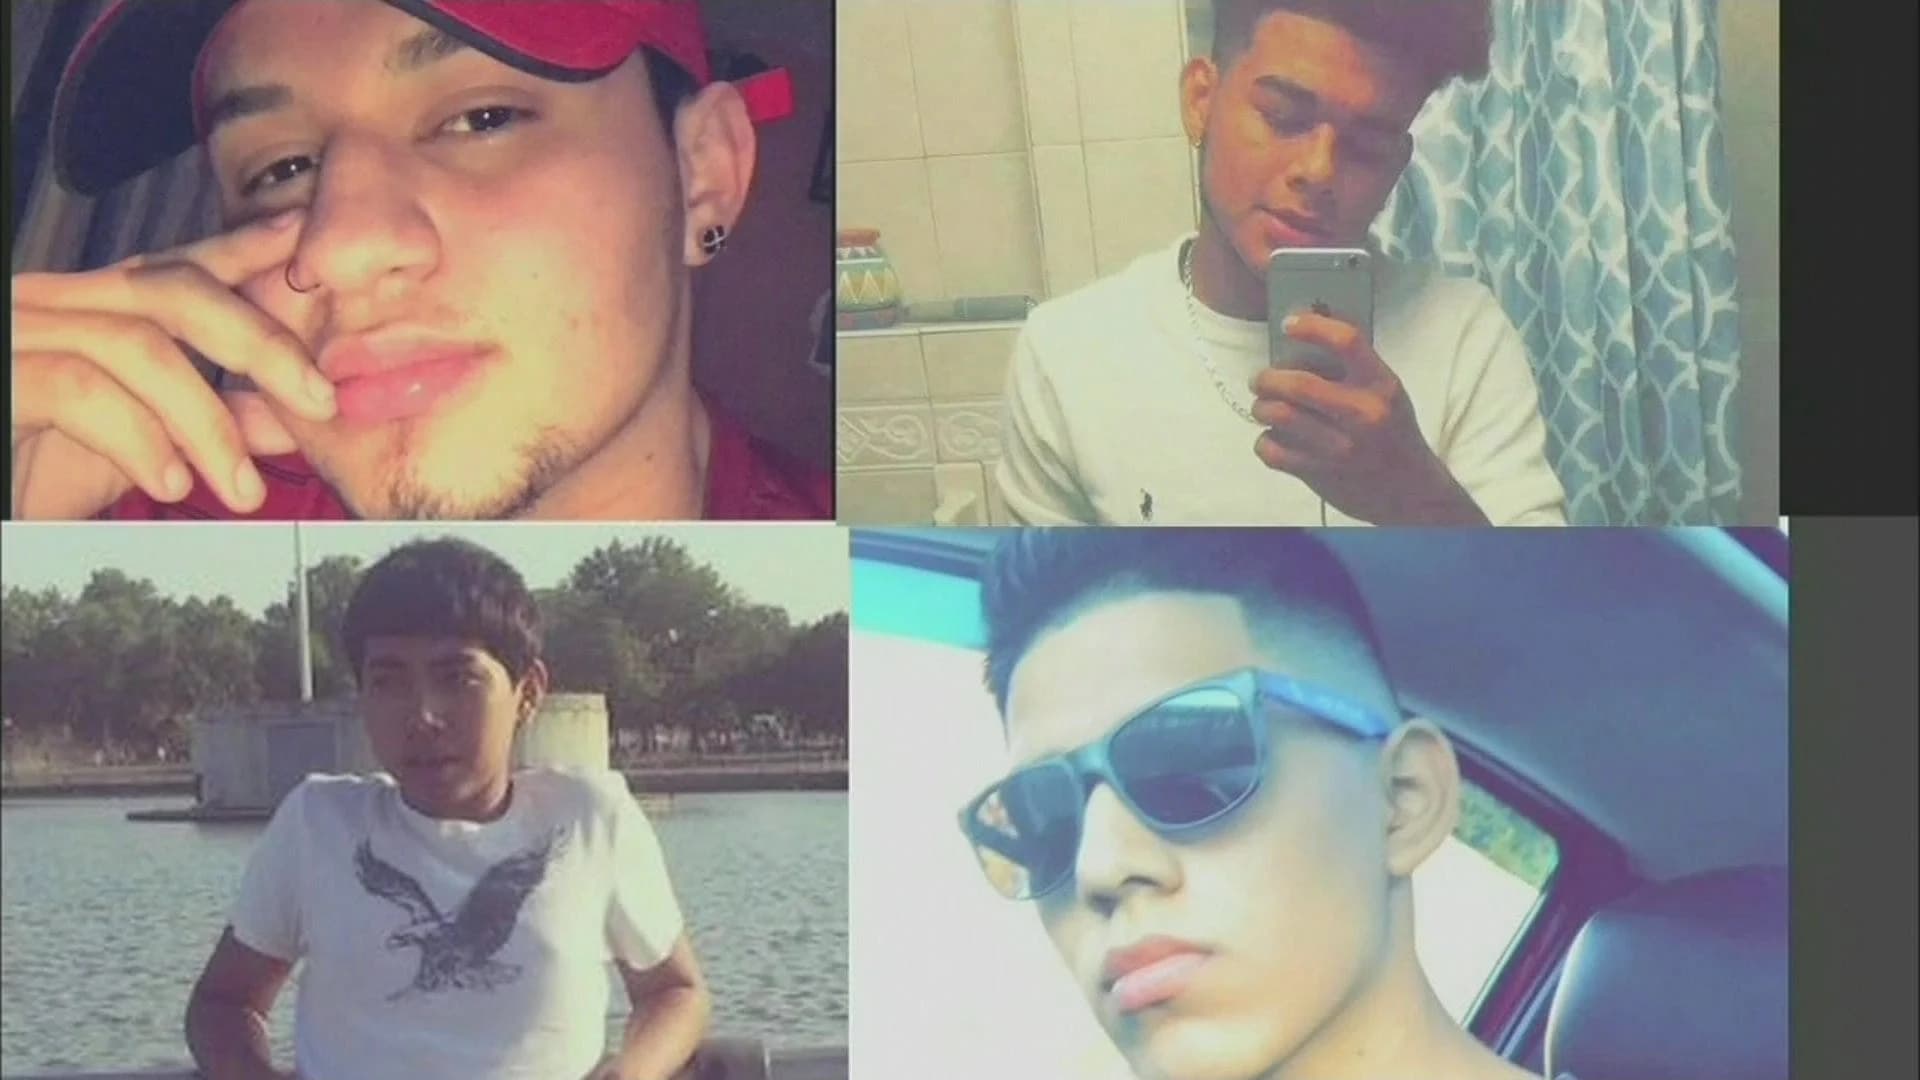 Services held for 3 victims of Central Islip quadruple homicide